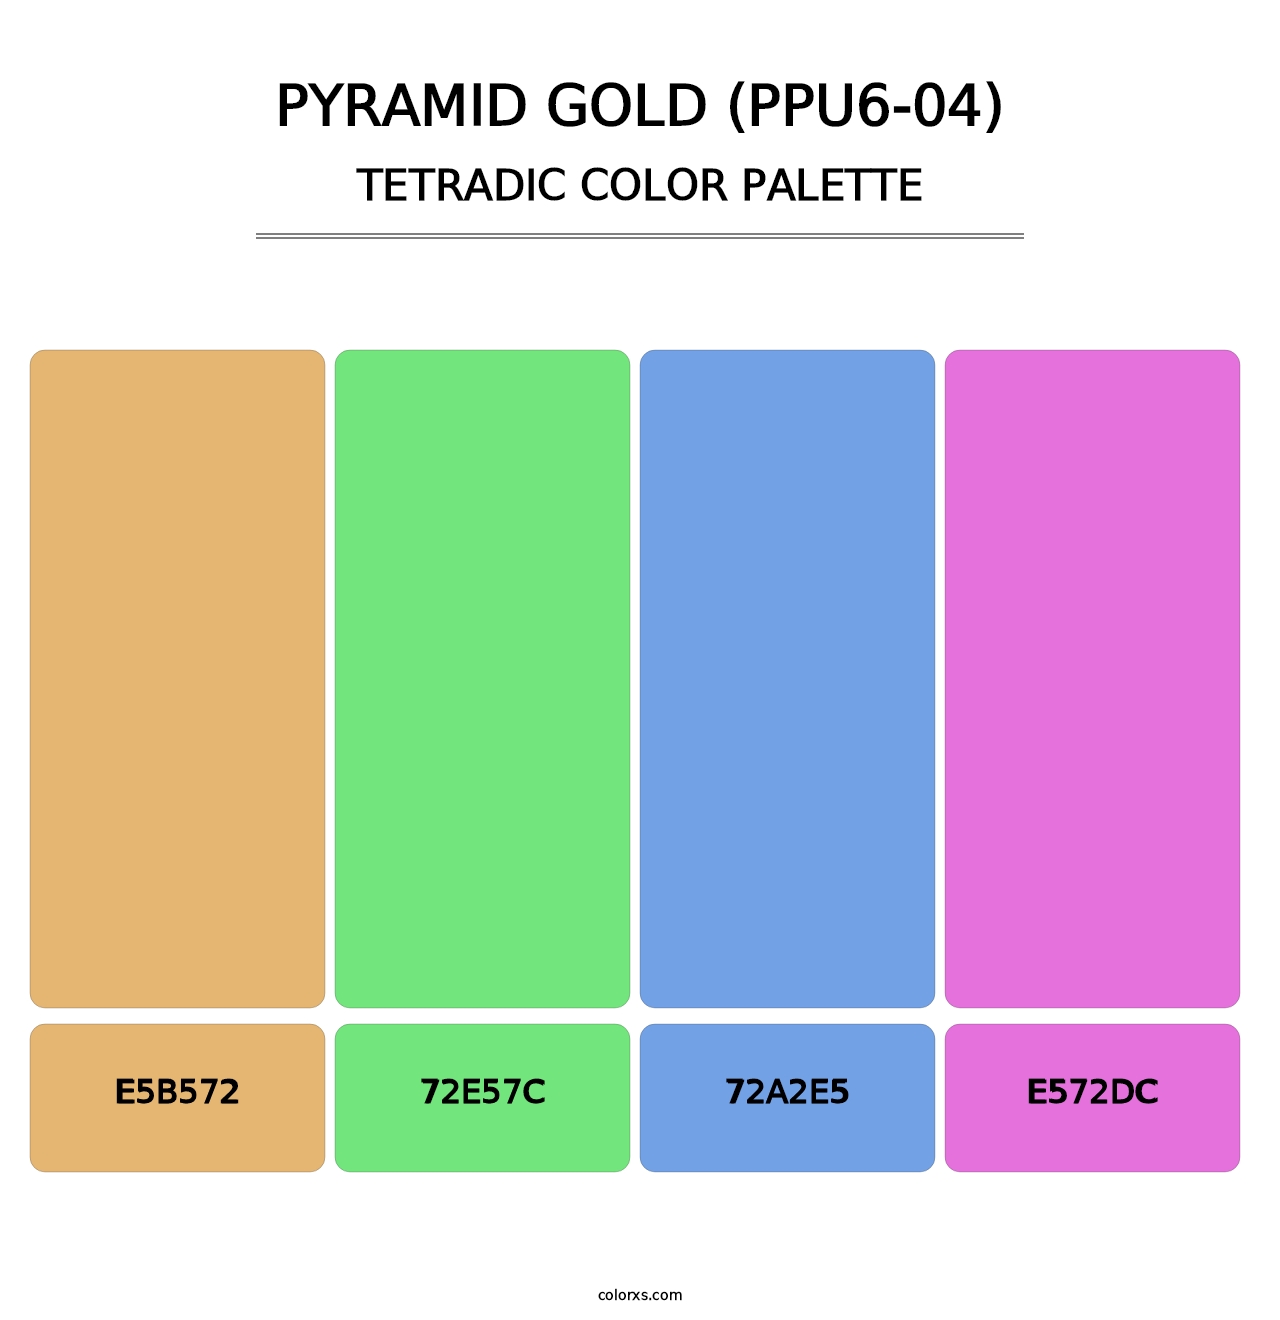 Pyramid Gold (PPU6-04) - Tetradic Color Palette